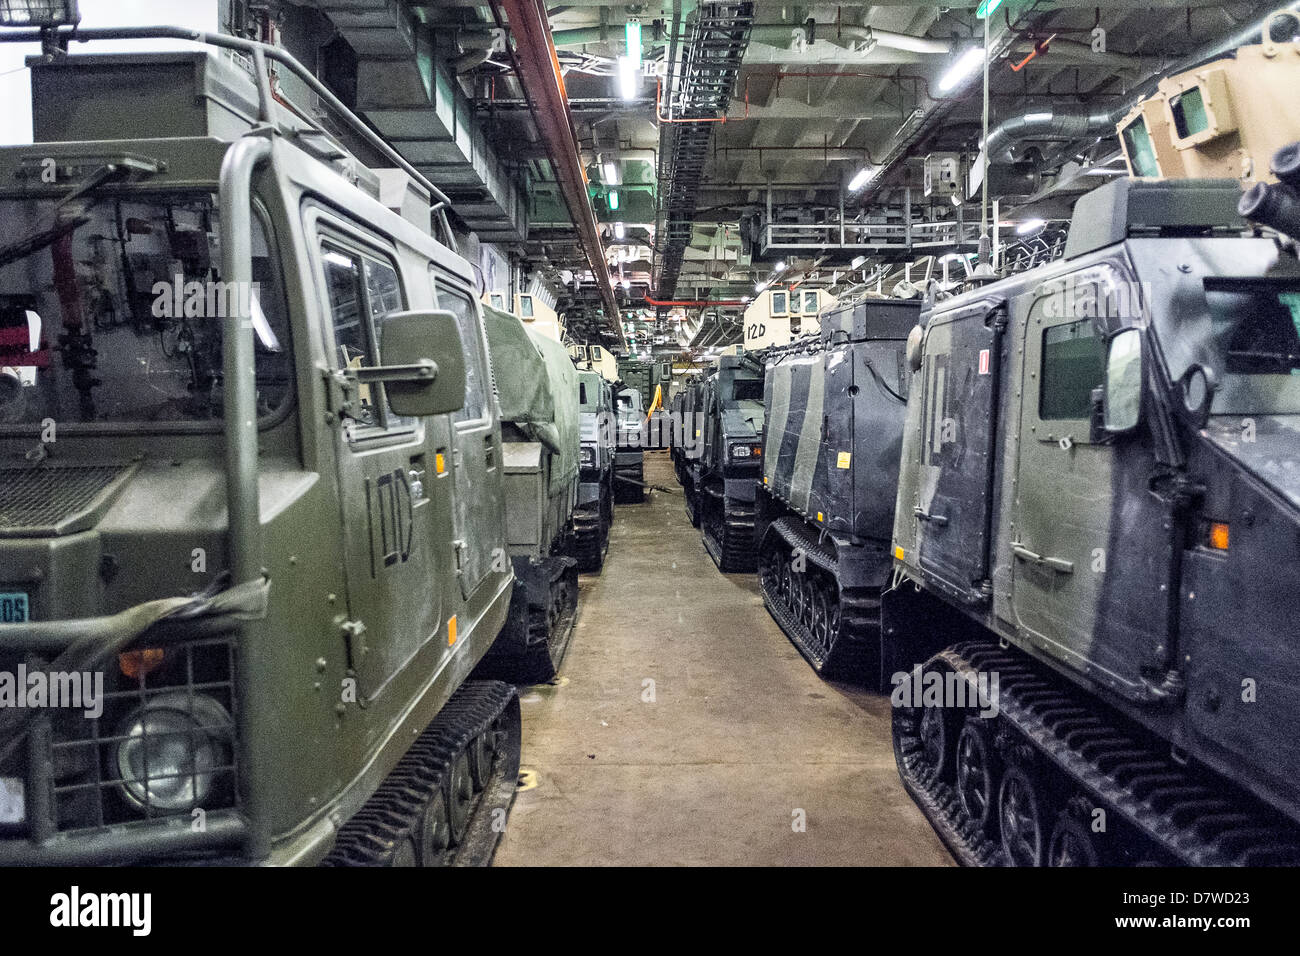 The Vehicle Deck onboard Assault Ship HMS Bulwark with Viking and BV personnel carrier vehicles of the Royal marines. Stock Photo